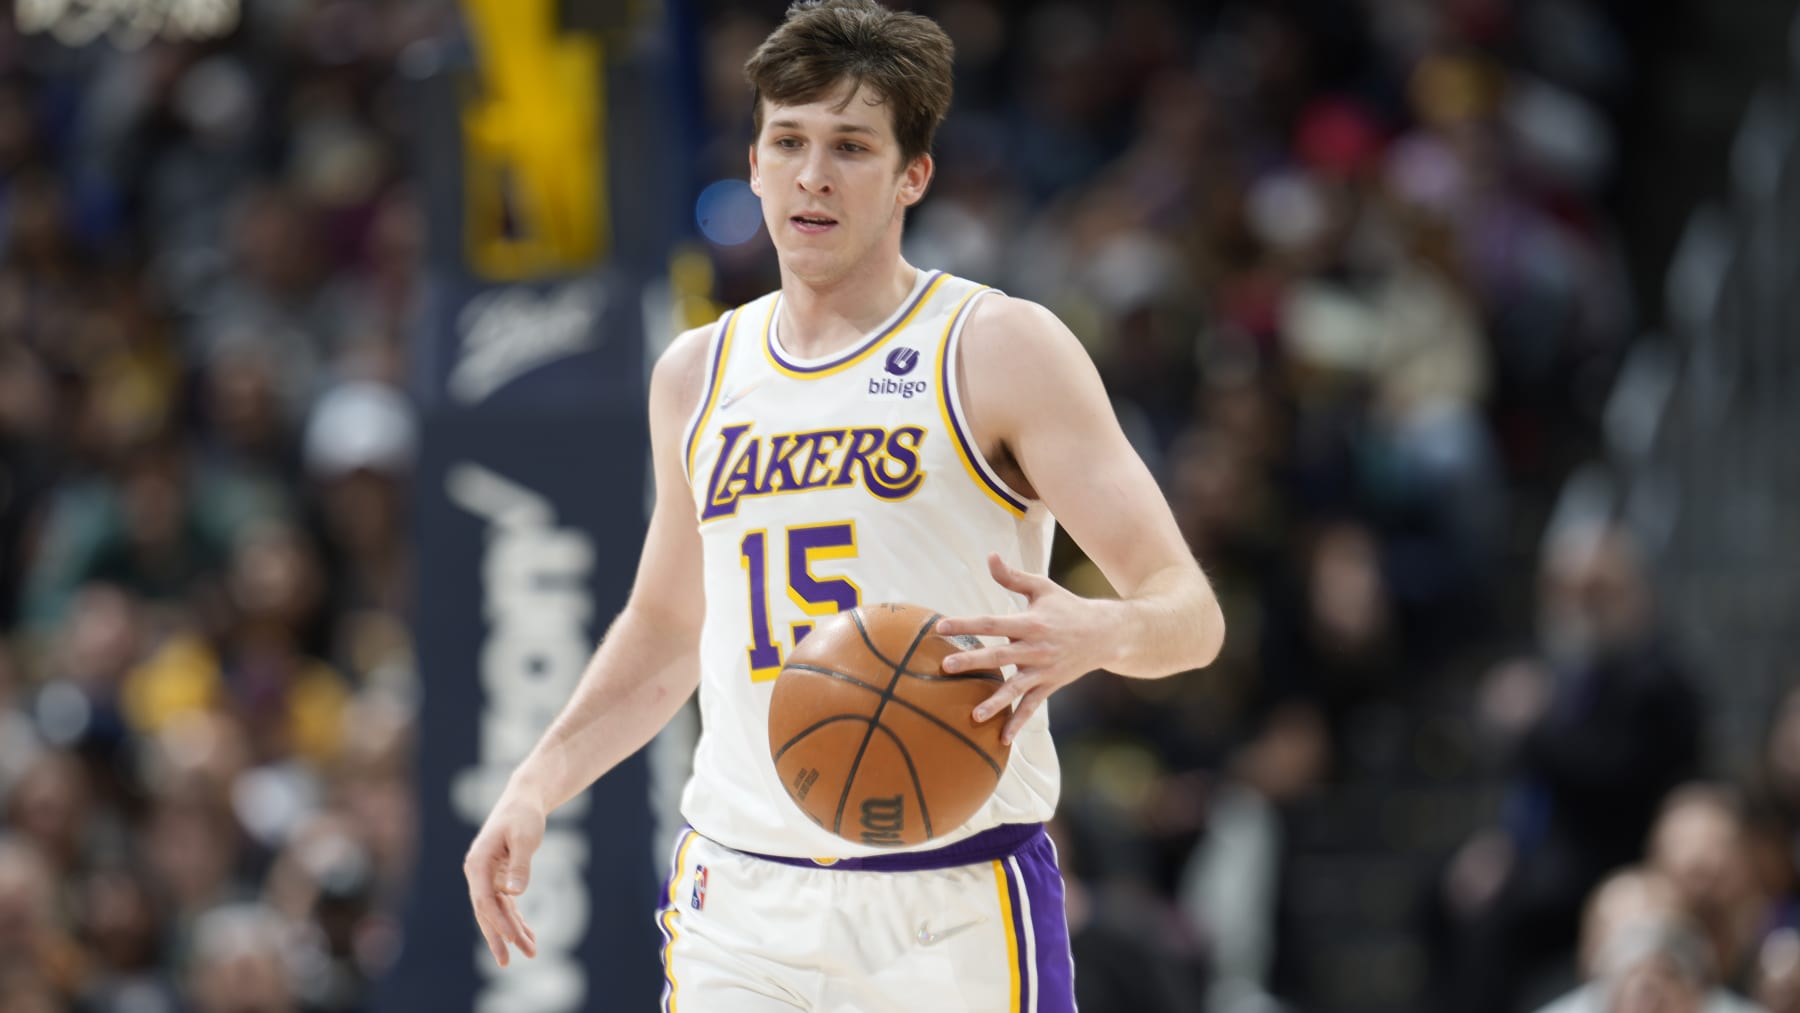 Lakers' Austin Reaves looks to distance himself from 'AR-15' nickname